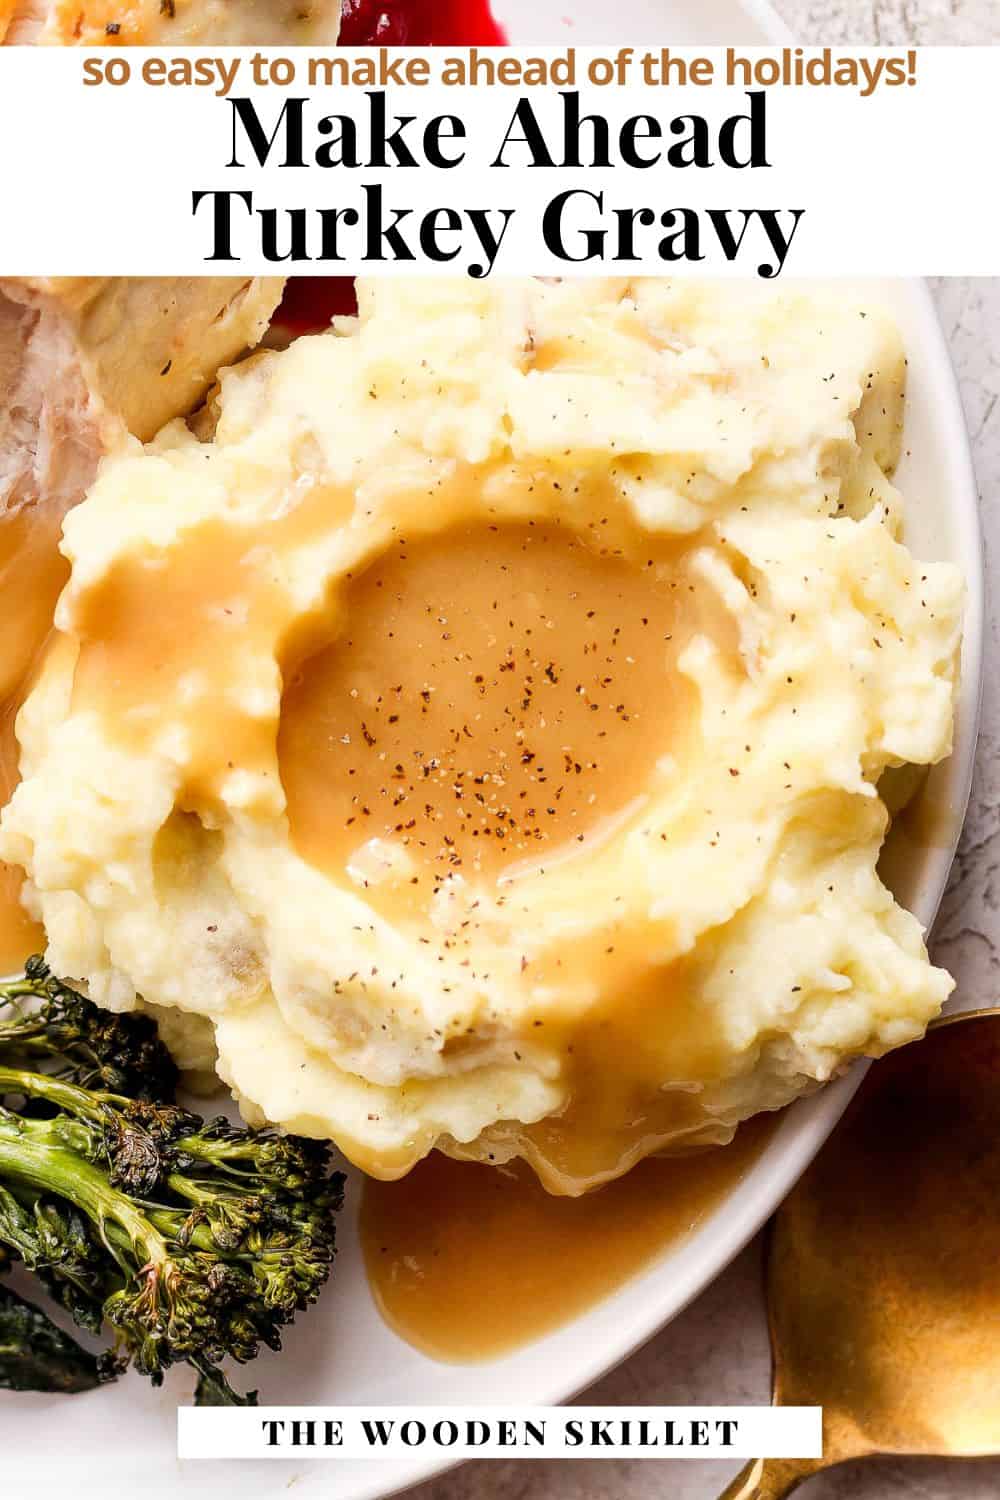 Pinterest image showing gravy on mashed potatoes with the title, "make ahead turkey gravy. So easy to make ahead of the holidays".